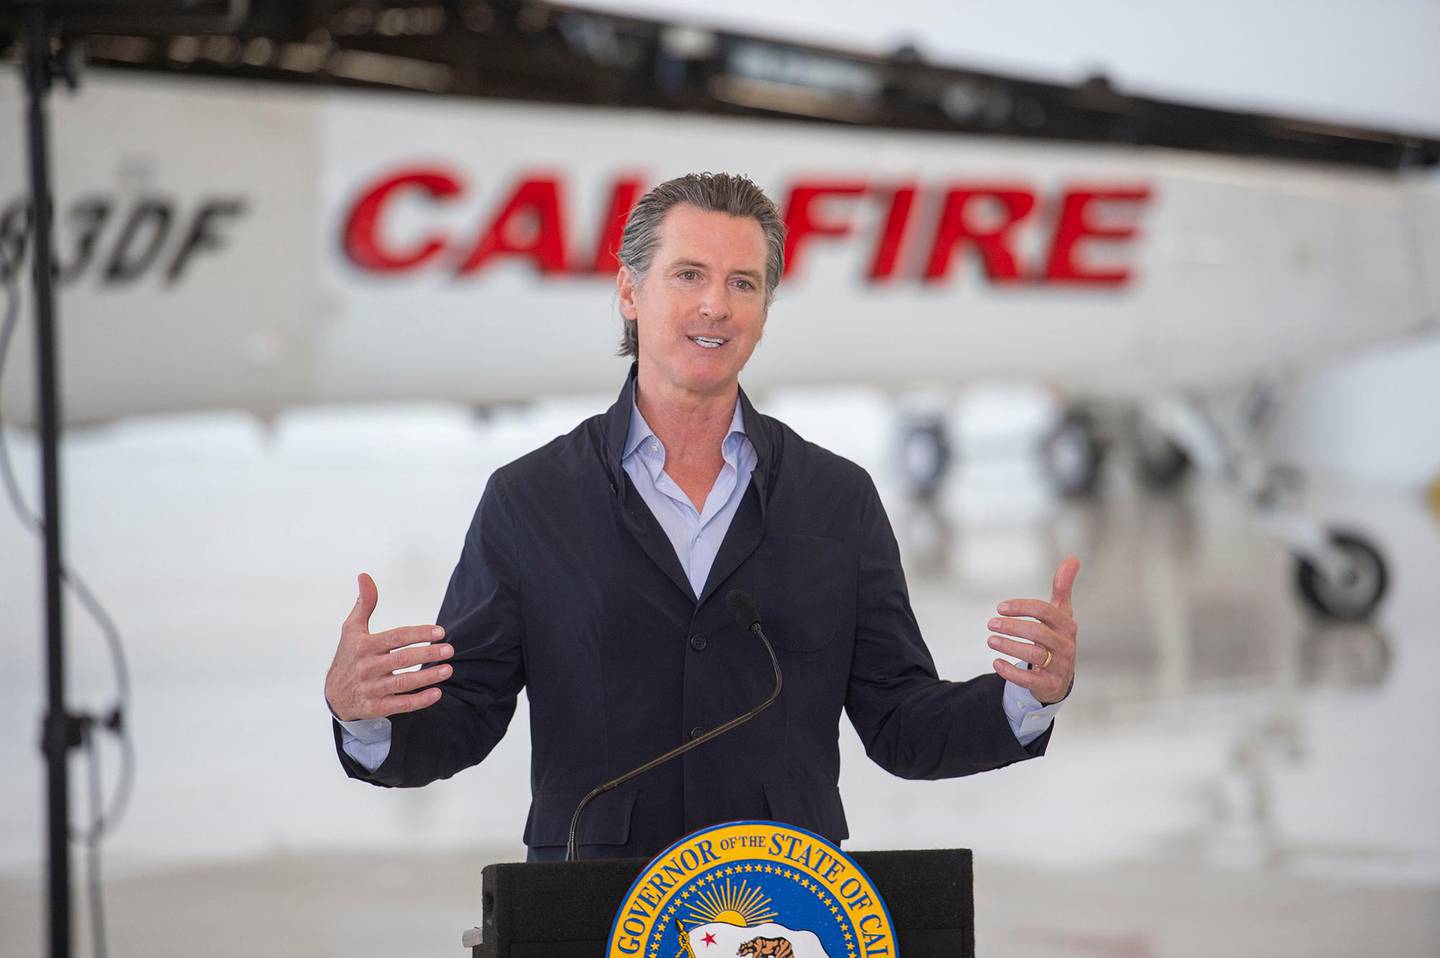 California Gov. Gavin Newsom visits the California Department of Forestry and Fire Protection's McClellan Reload Base in Sacramento, Calif., Thursday, July 9, 2020, to discuss the state's new efforts to protect emergency personnel and evacuees from COVID-19 during wildfires. (AP Photo/Hector Amezcua, Pool)